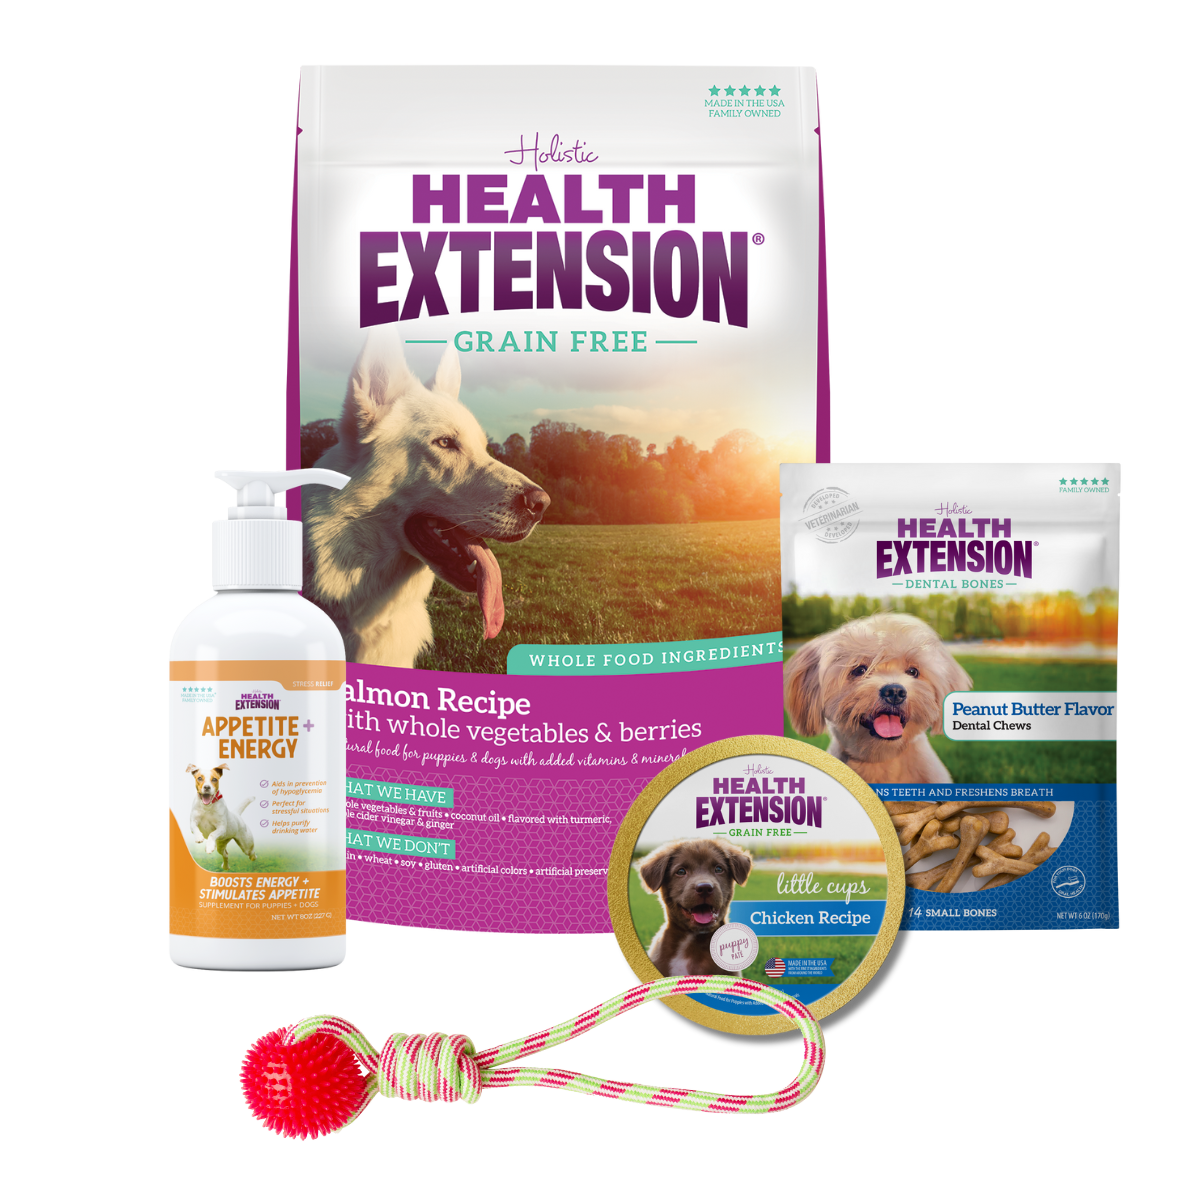 Complete Puppy Bundle: Health Extension Grain Free Salmon Dry Dog Food and variety of other dog products, including food, treats, toys, and supplements.